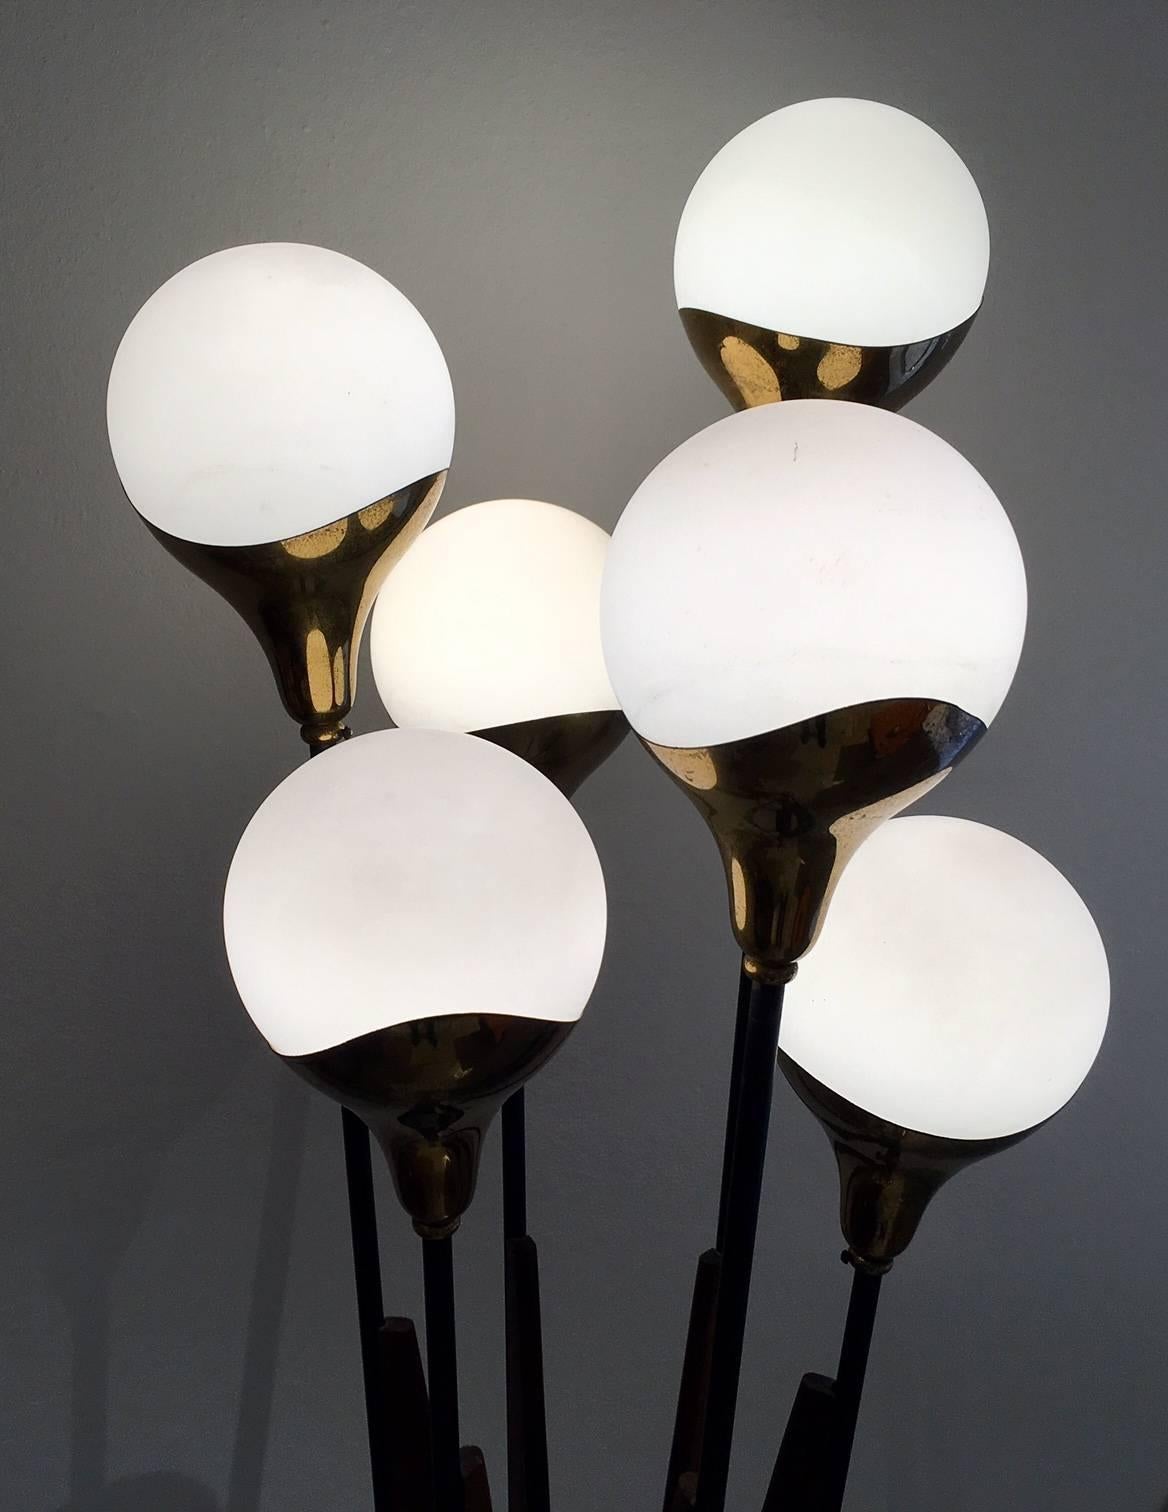 20th Century Stilnovo Floor Lamp with Six Lights, Marble Base and Wooden Details